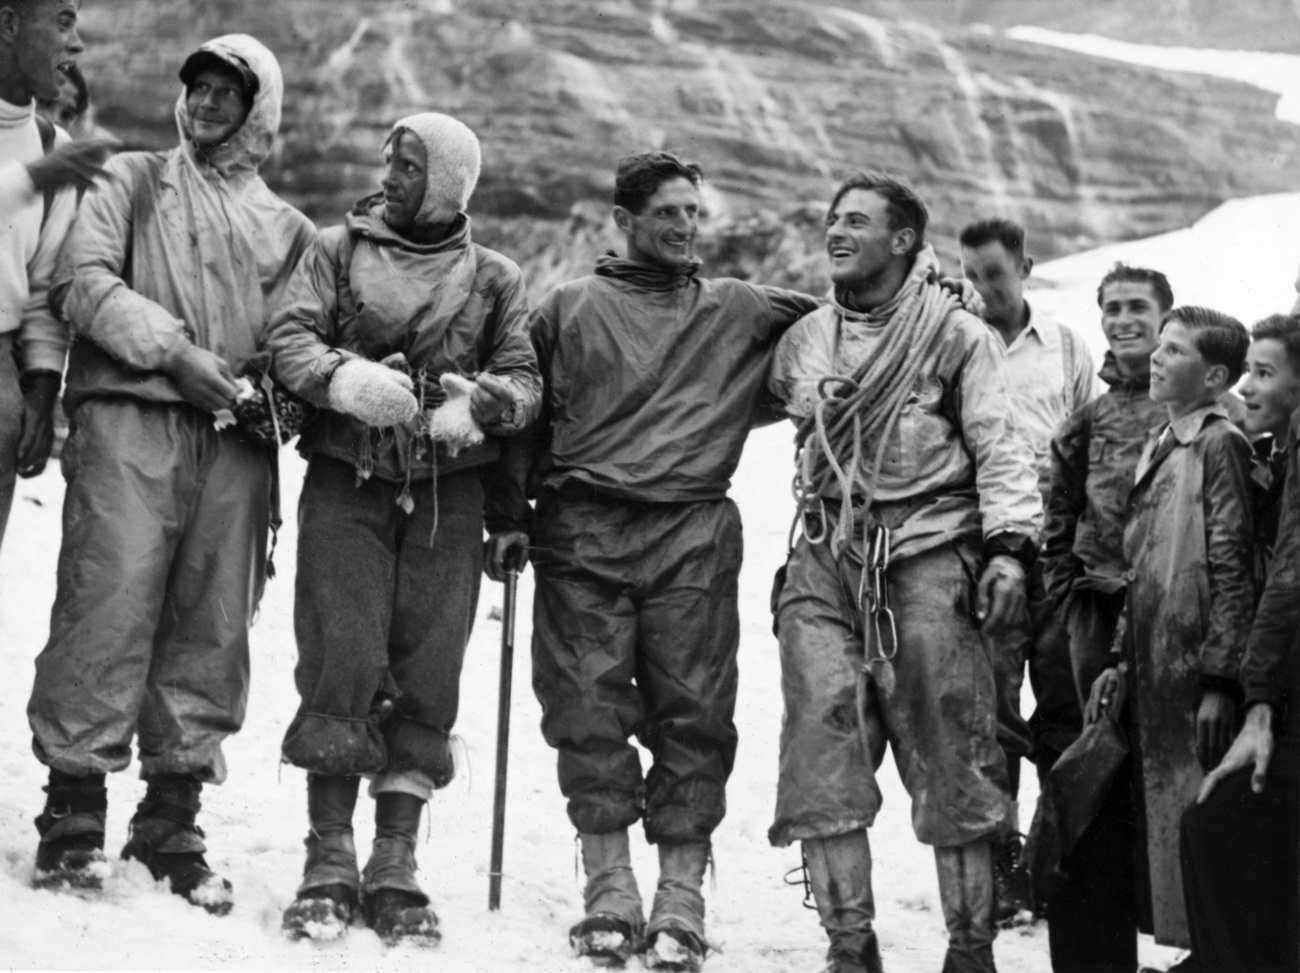 The mountaineers Heinrich Harrer, Andreas Heckmair, Ludwig Voerg and Fritz Kasparek, from left to right, during the first successful ascent of the Eiger north face near Grindelwald, Switzerland, pictured in July 1938.